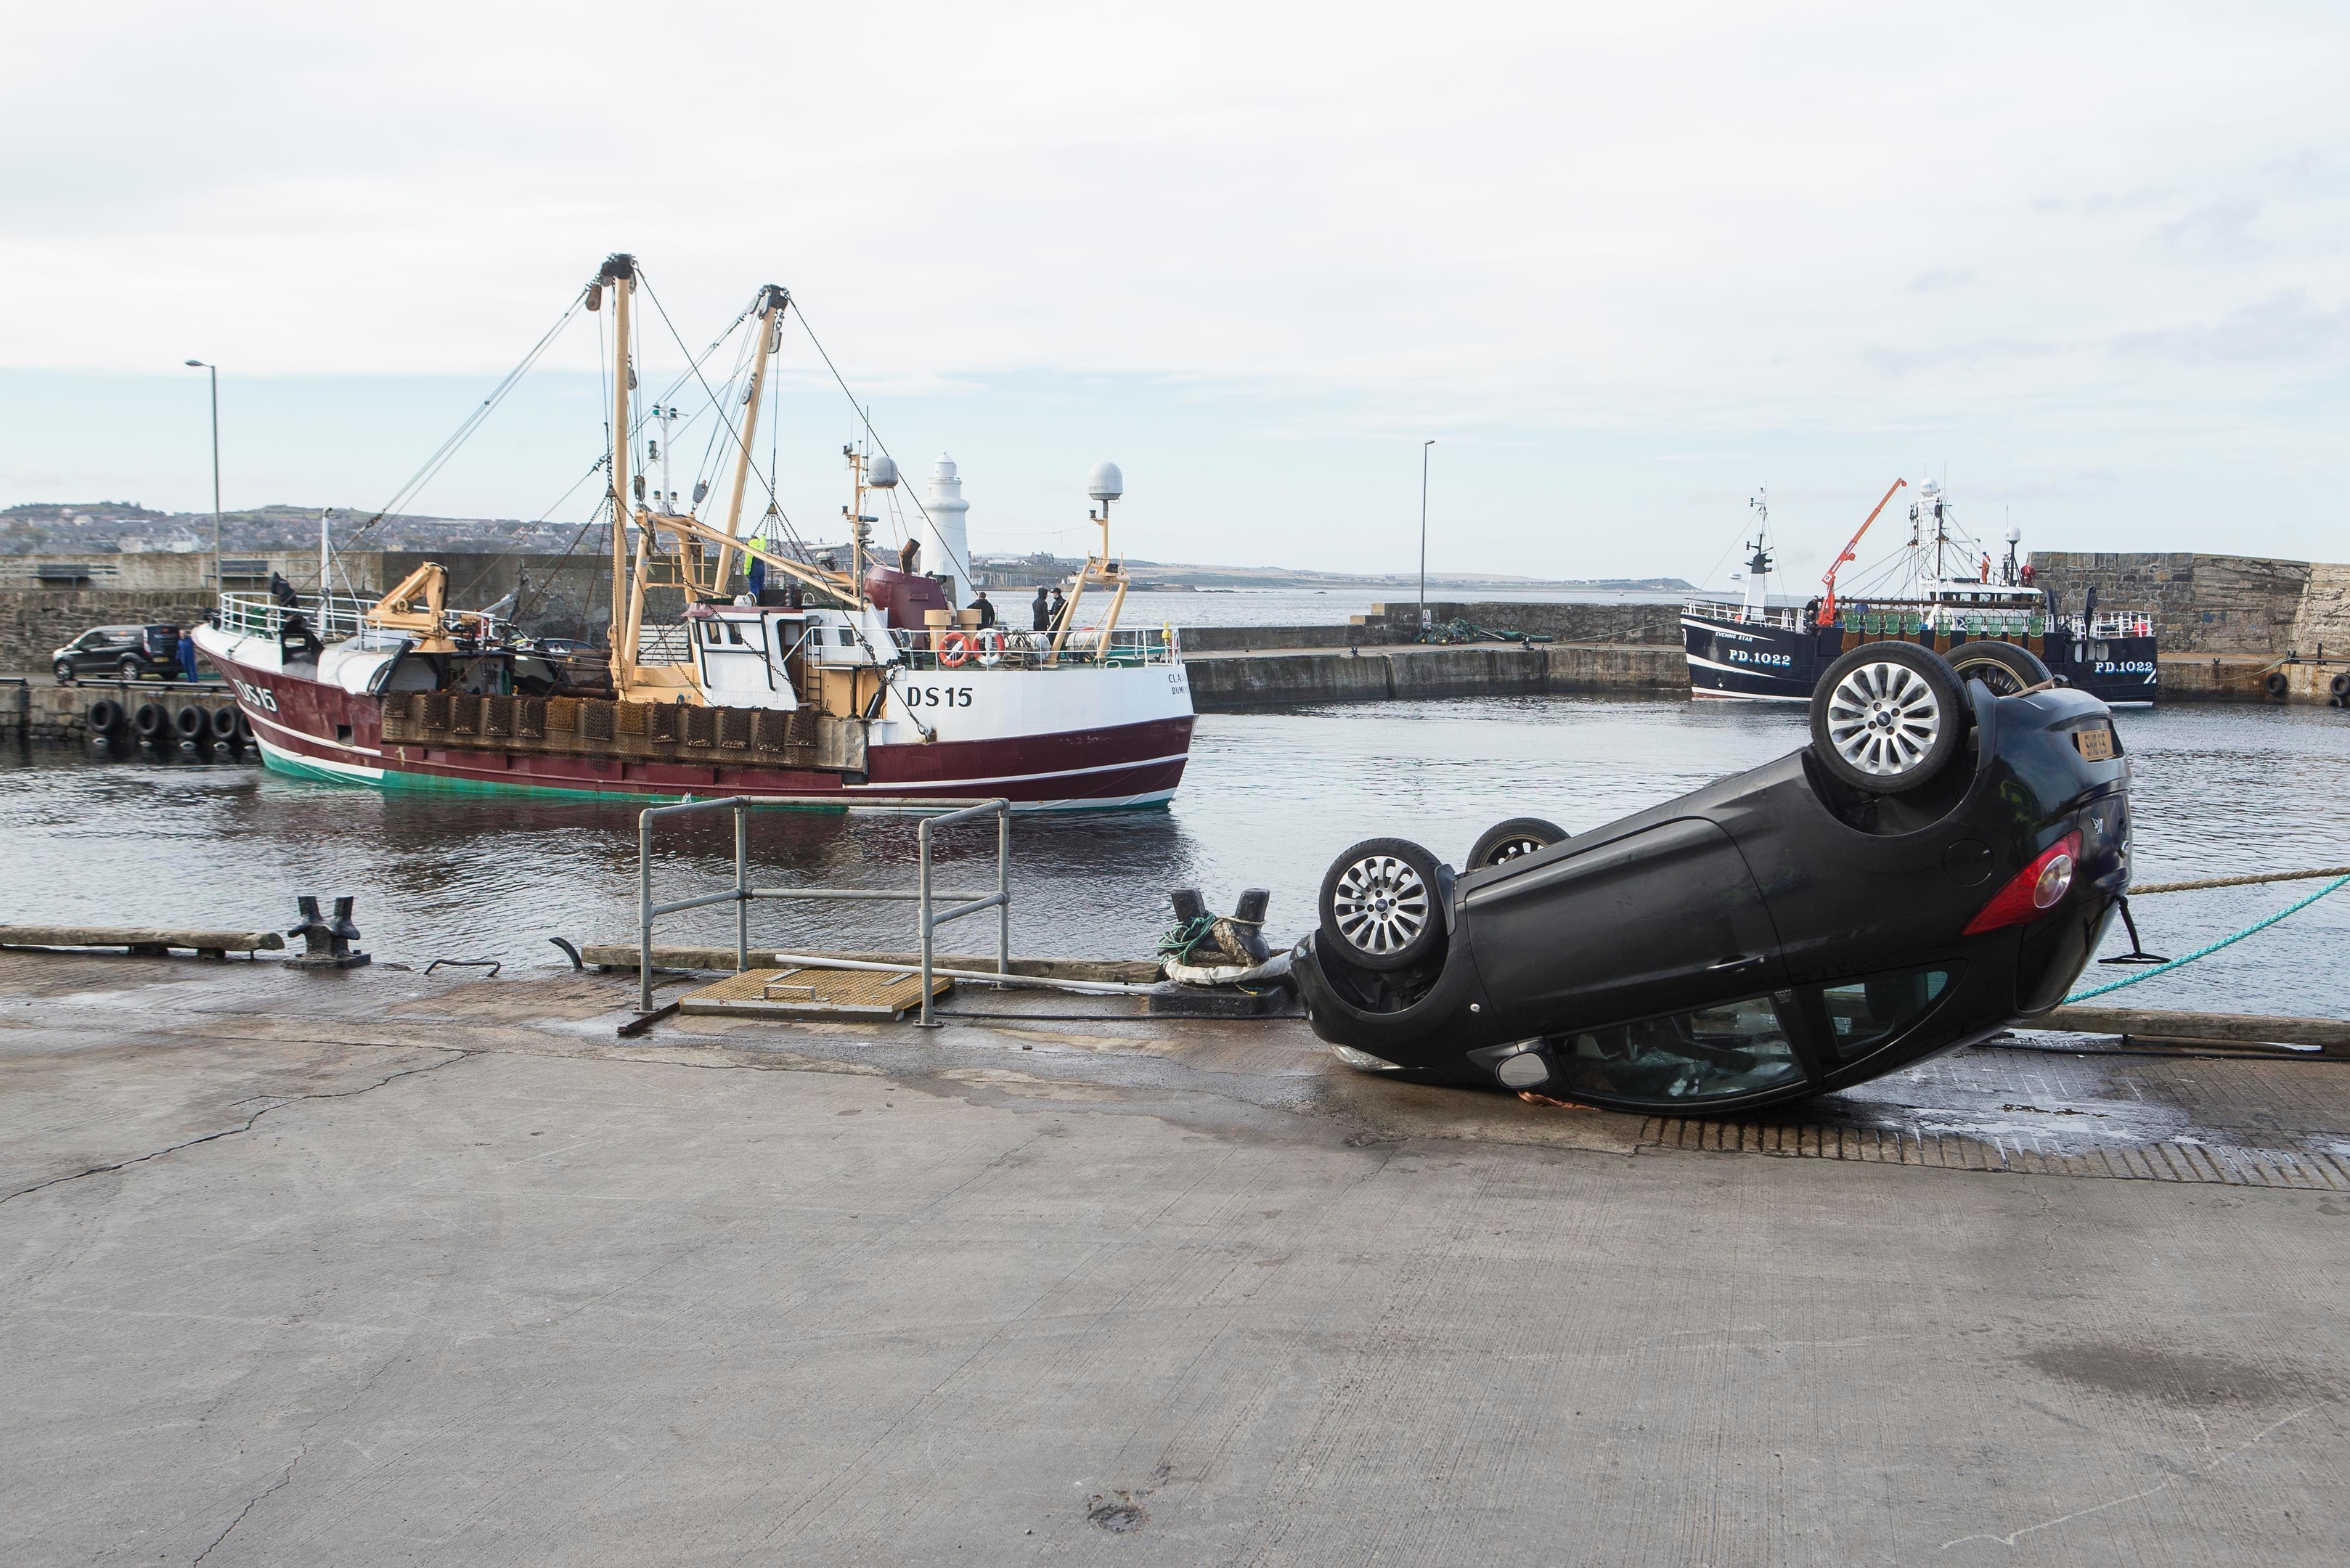 The ford Ka which entered the harbour